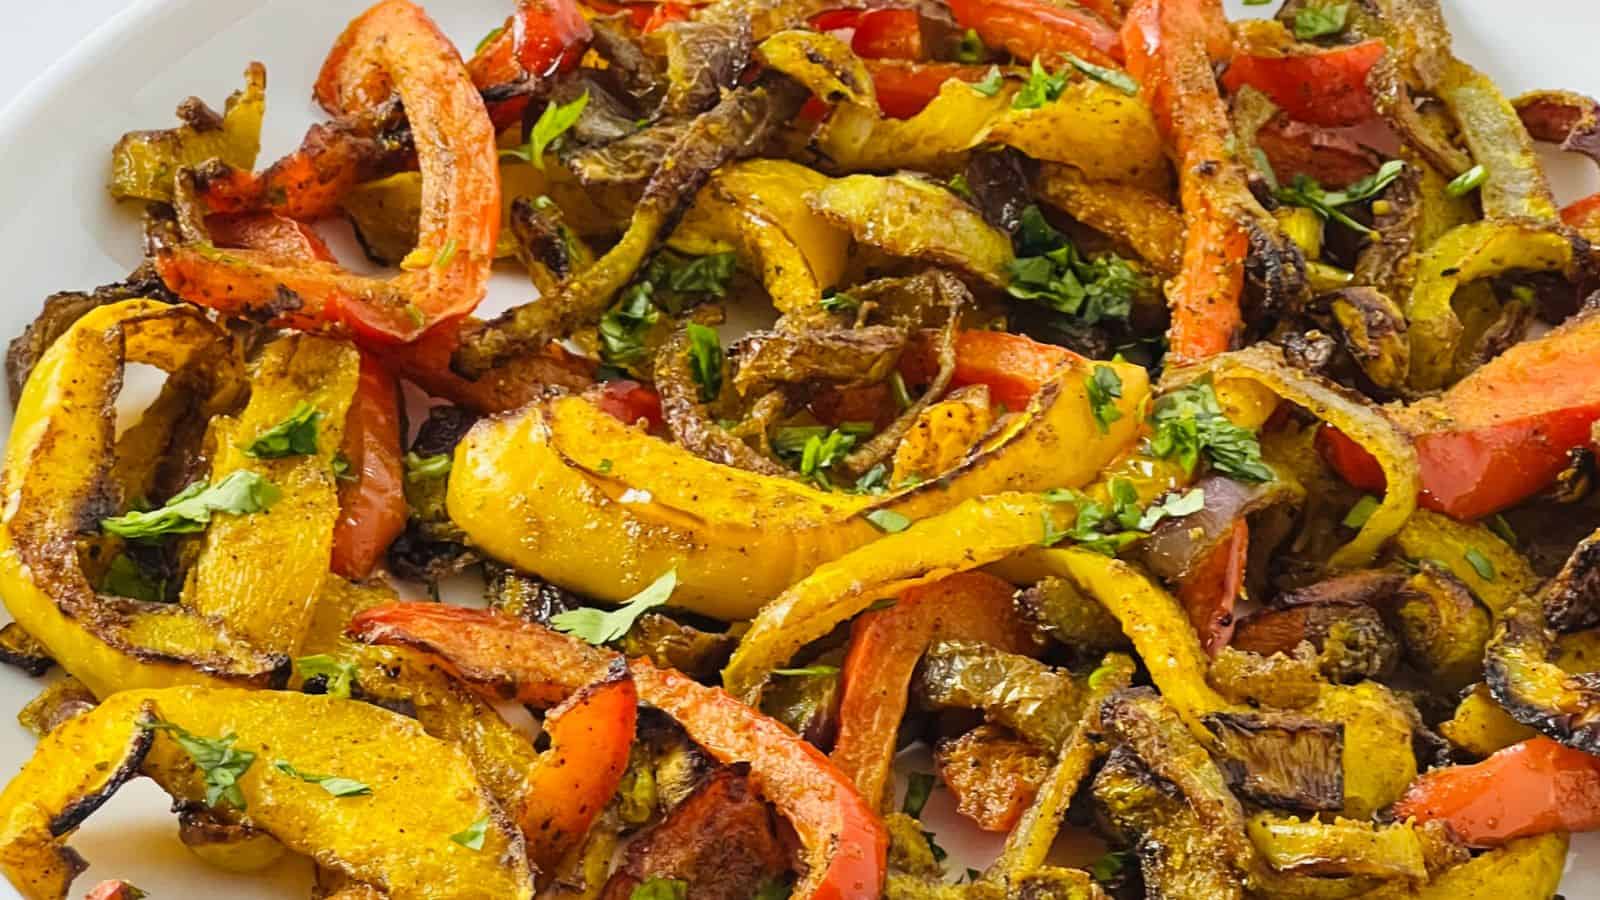 A plate of sautéed colorful bell peppers seasoned with herbs and spices.